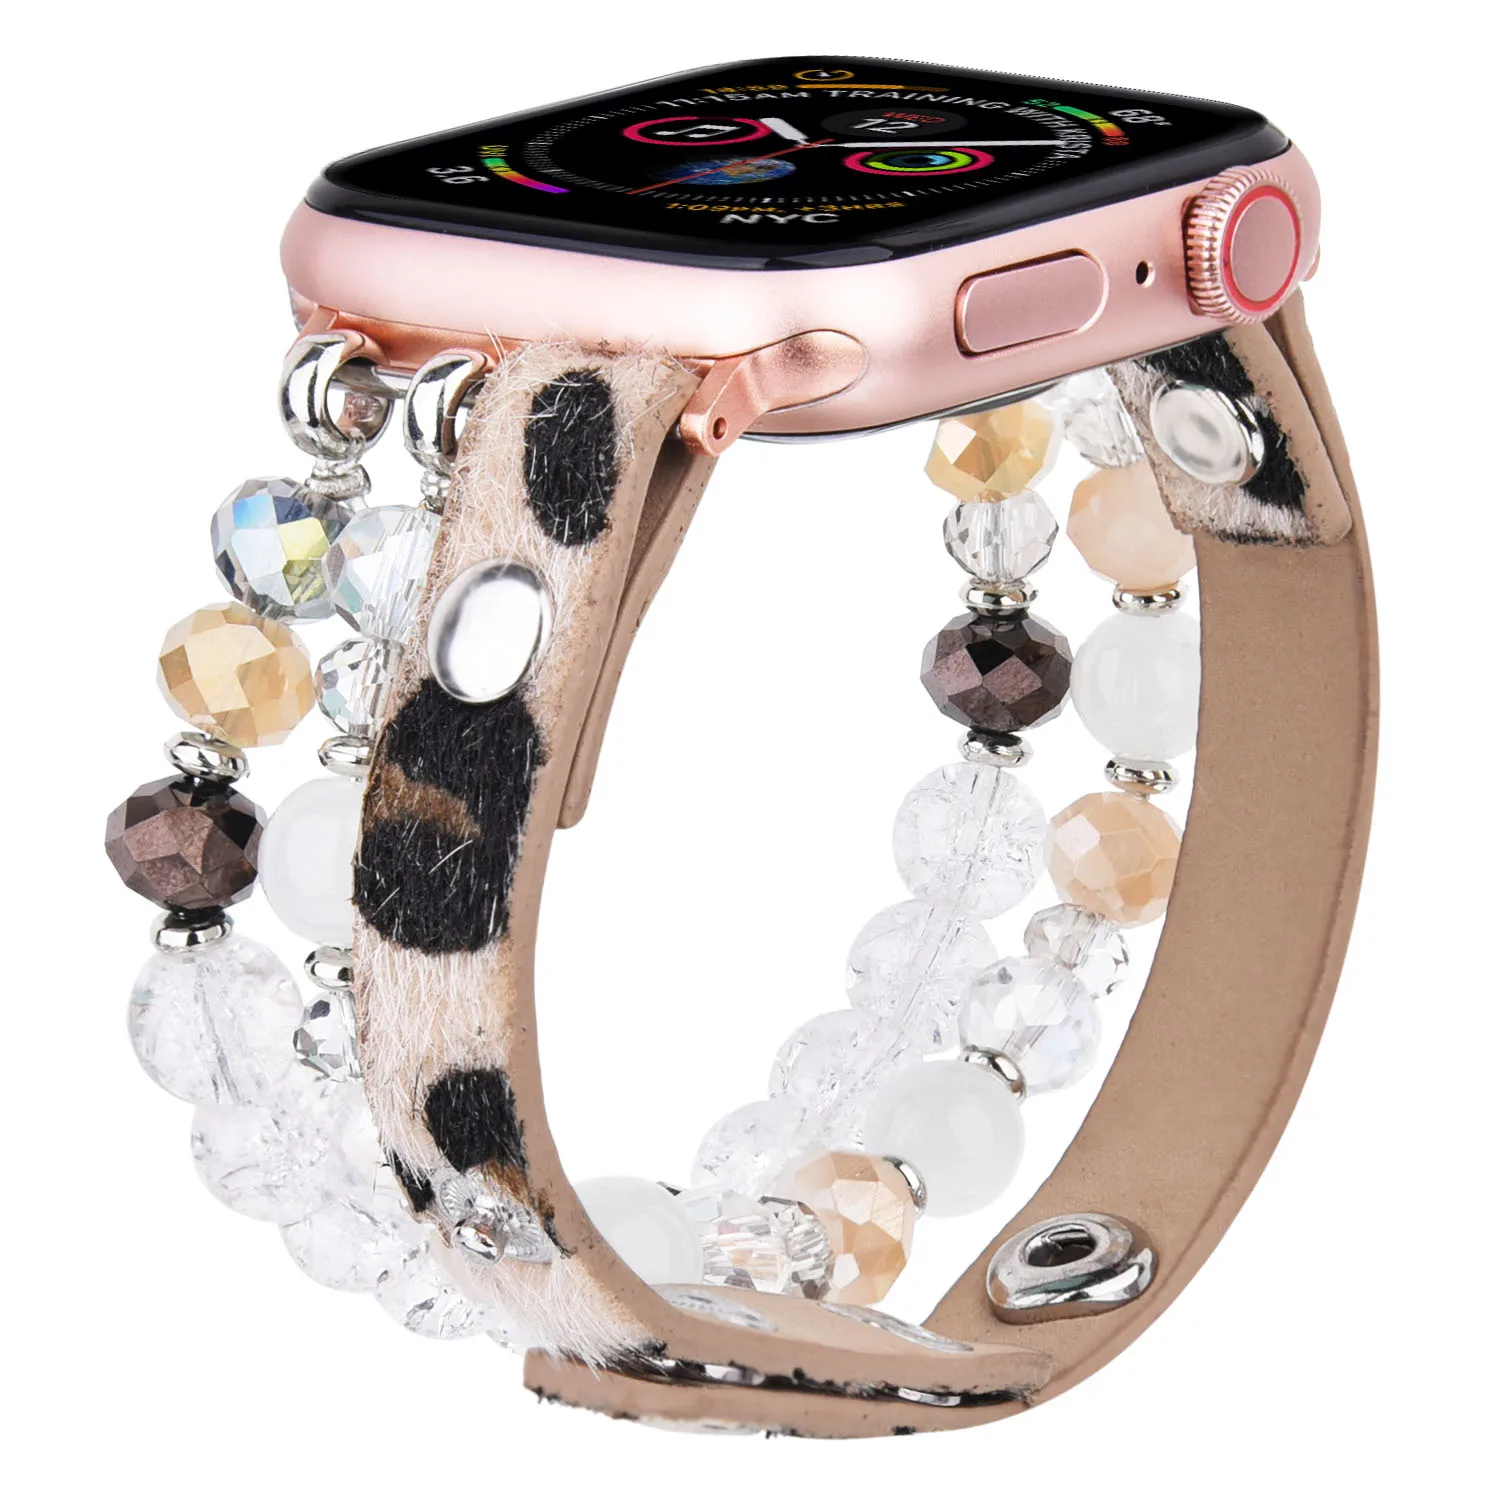 

New Model Fashion Design Beads Watch Strap for Iwatch Series 5/4/3/2/1, Ladies PU leather Watch Band for apple watch 38mm42mm, Various colors